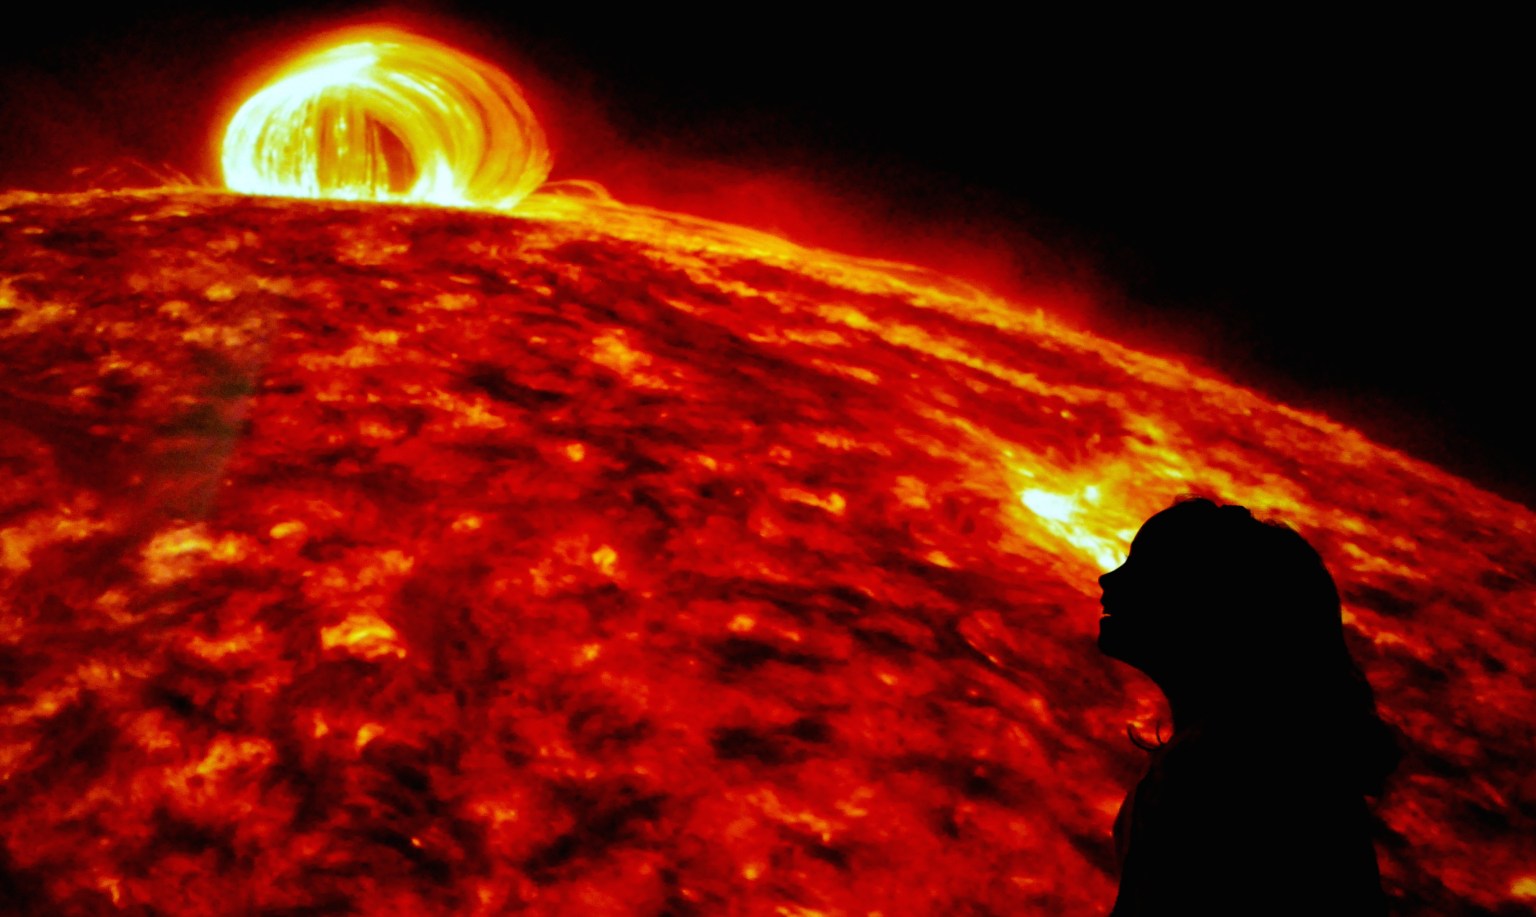 An excitedly smiling child appears silhouetted in profile against the backdrop of an image of the Sun, its surface curving across the screen from left to right and a bright yellow loop erupting from its red and yellow swirling surface. Space is black behind the Sun, and the Sun's corona appears as a diffuse red glow along its edge.